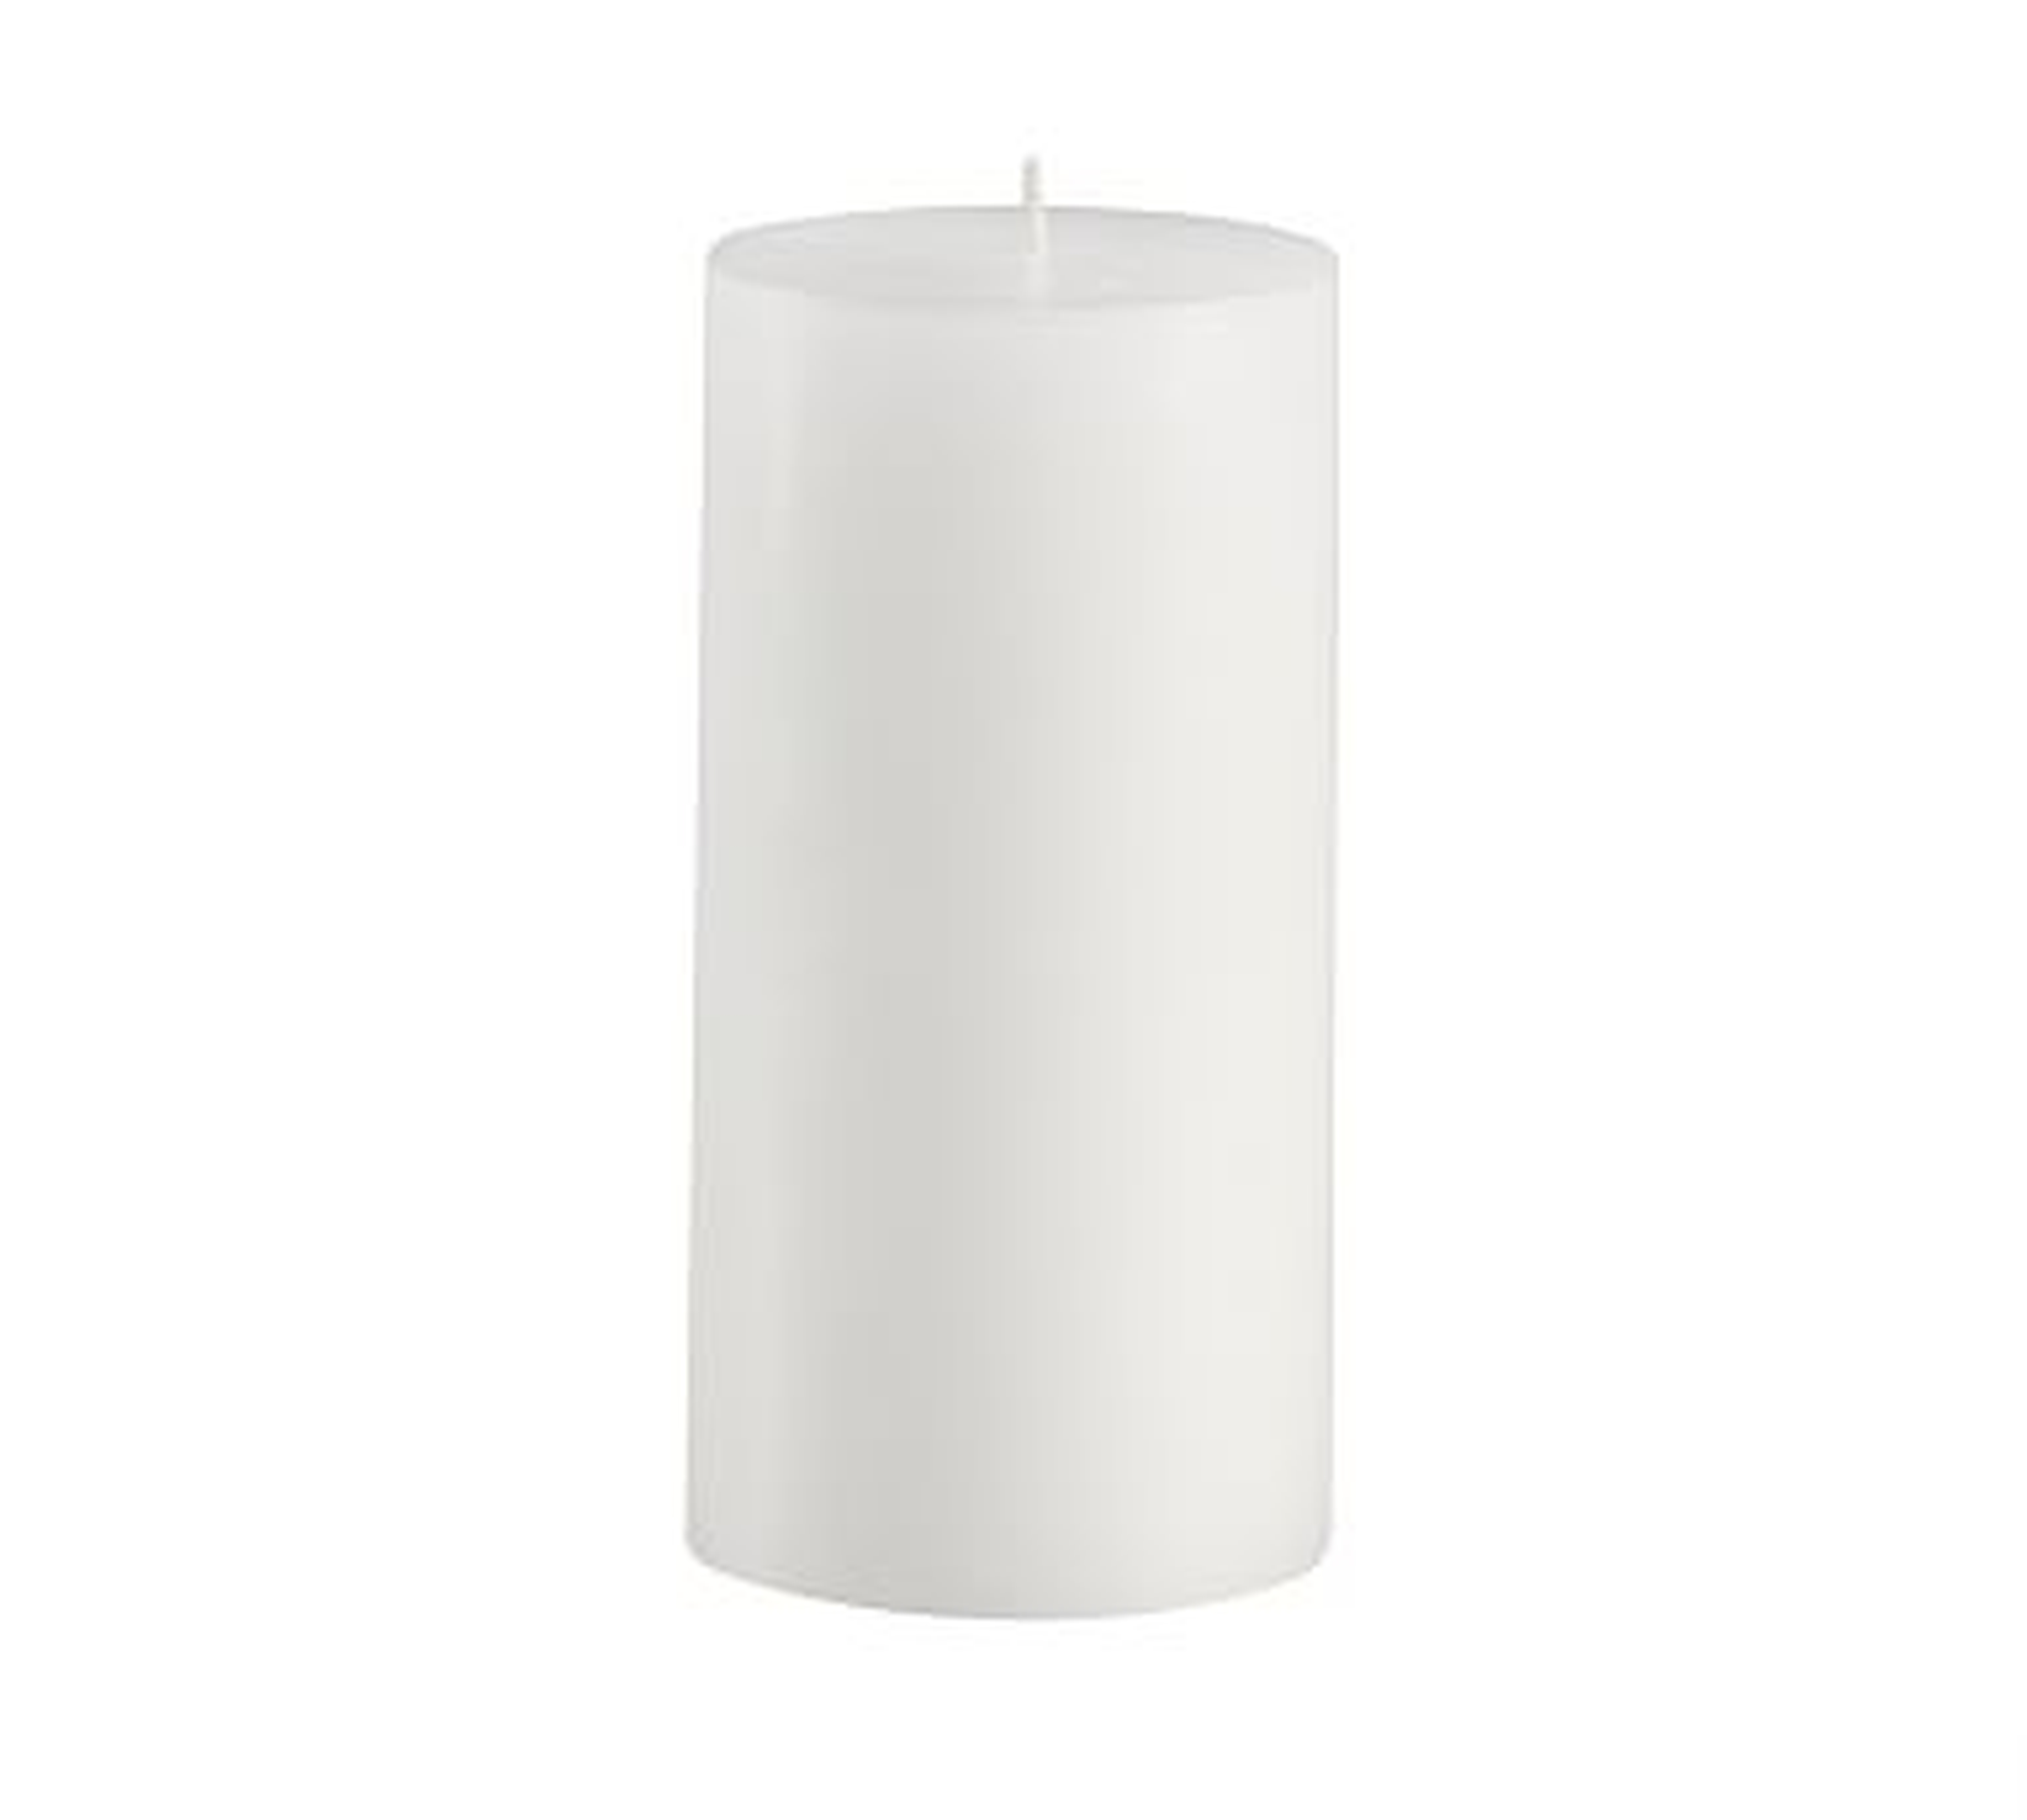 Unscented Pillar Candles, White - 3 x 6 - Pottery Barn